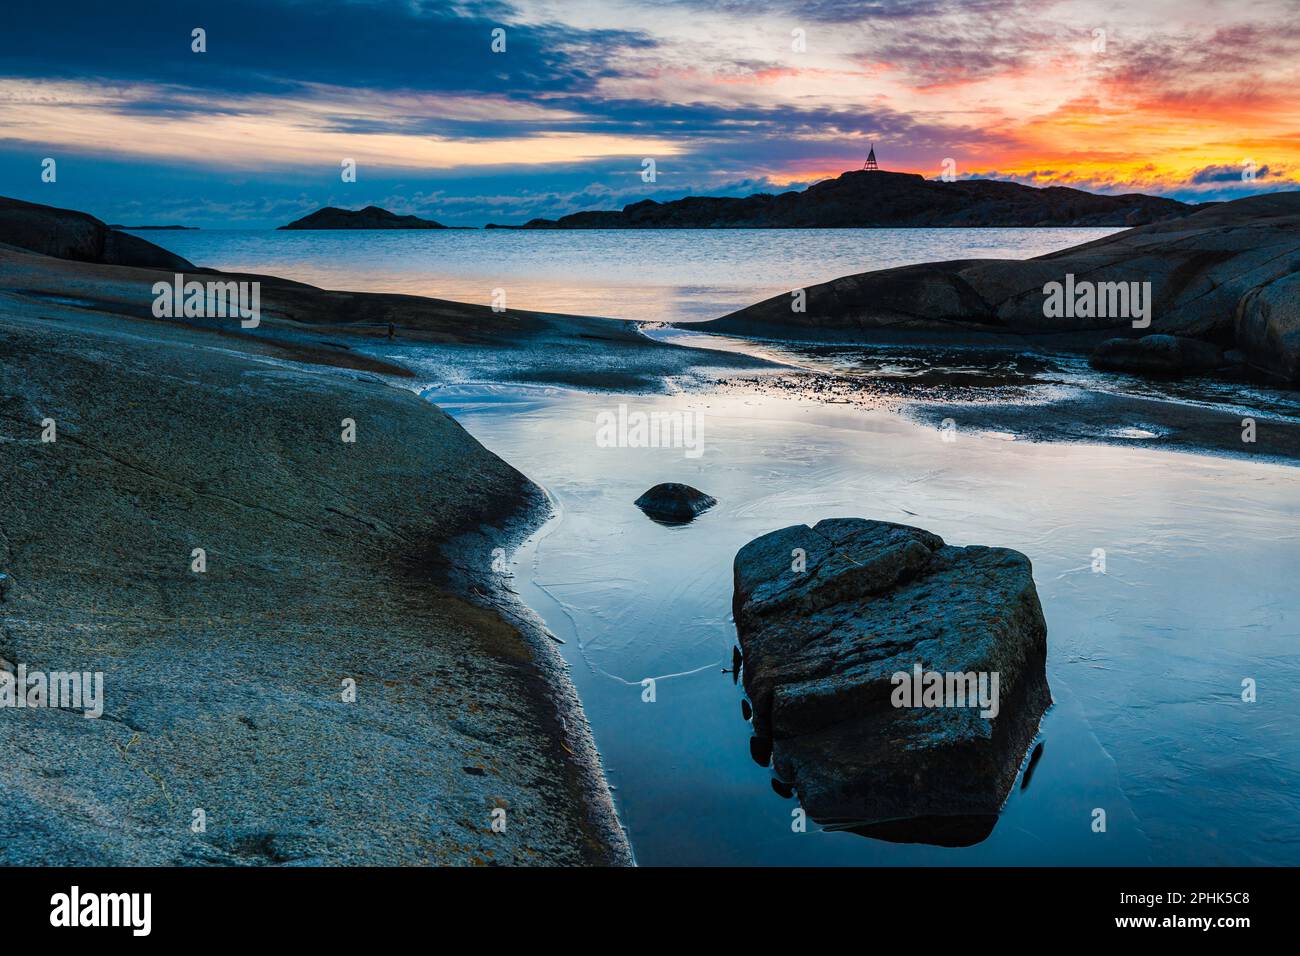 A beautiful seascape at sunset on the Swedish coast, reflecting off the water and its rocky shoreline. Natures beauty in perfect tranquility. Stock Photo